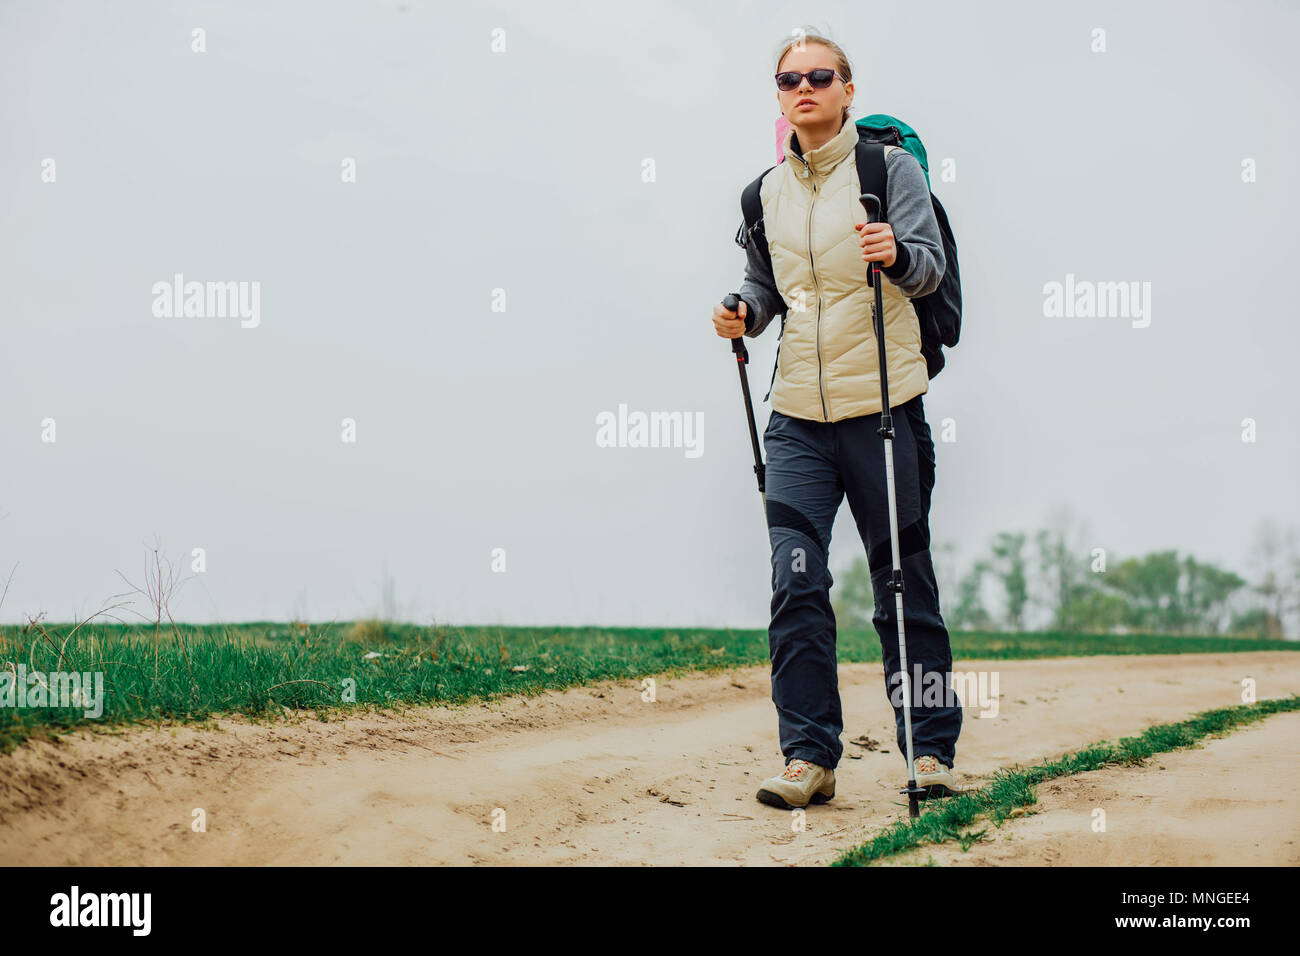 female hiker walking along a hiking trail, low viewing angle. Stock Photo